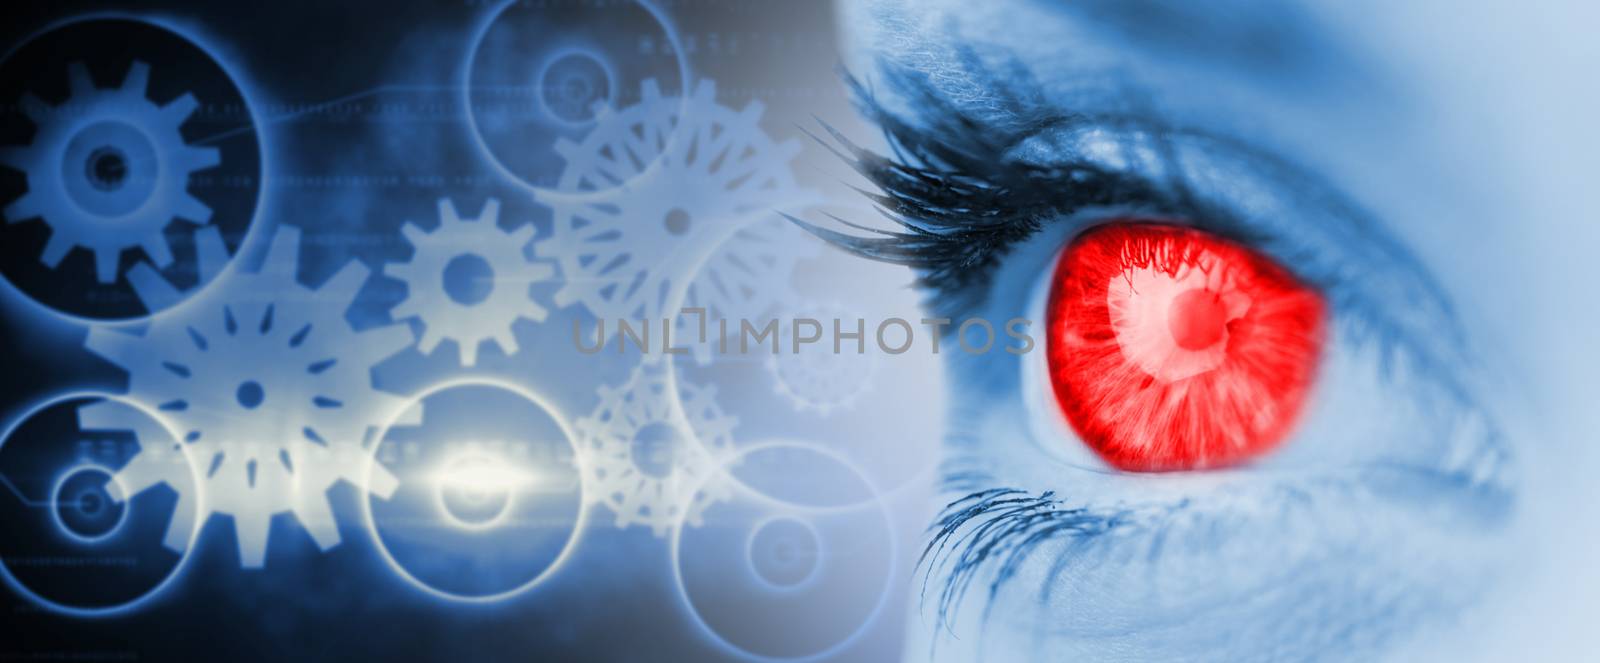 Composite image of red eye on blue face by Wavebreakmedia